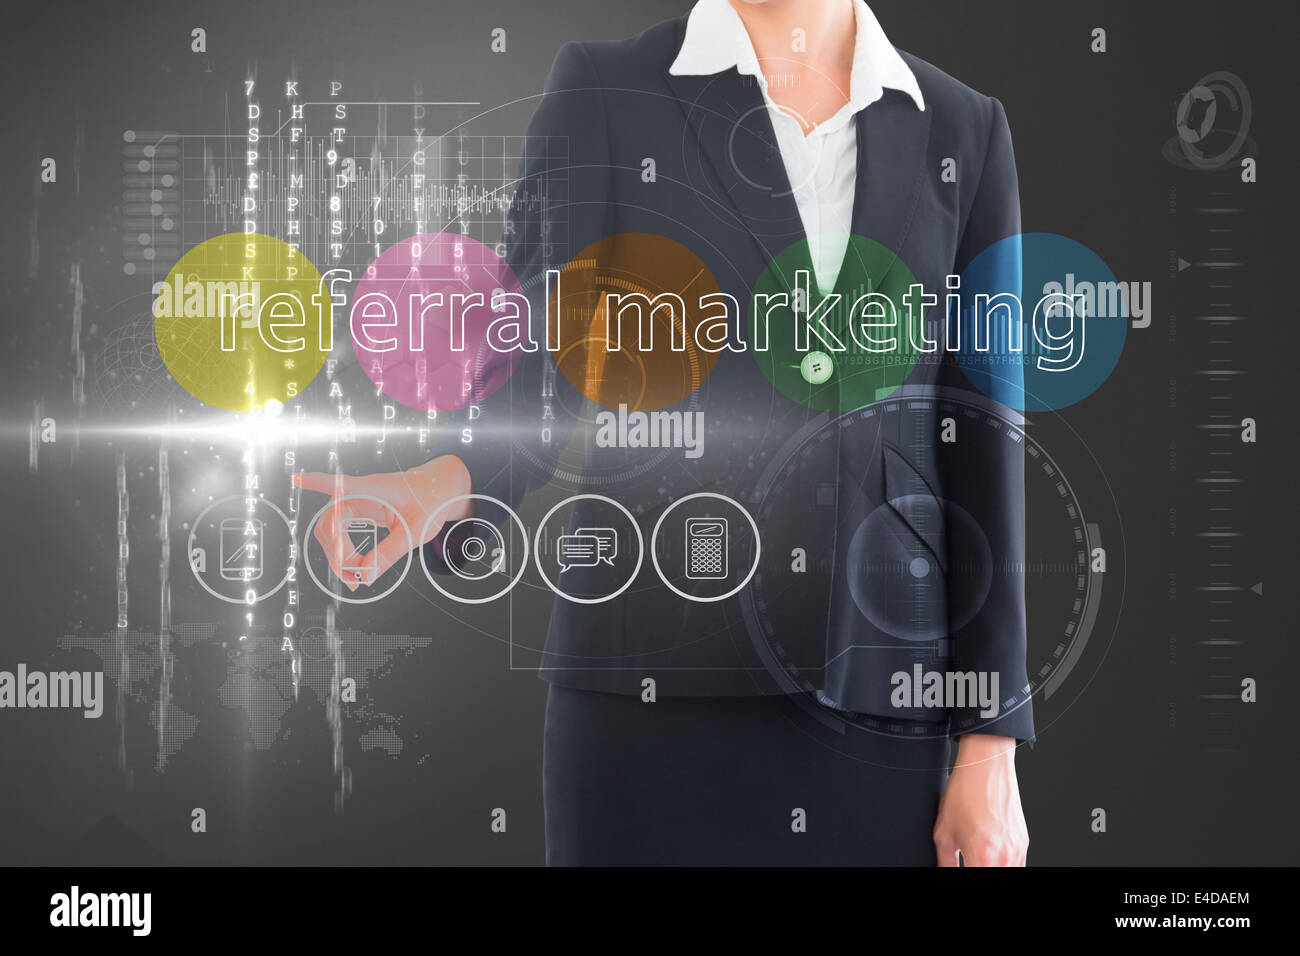 Businesswoman touching the words referral marketing on interface Stock Photo